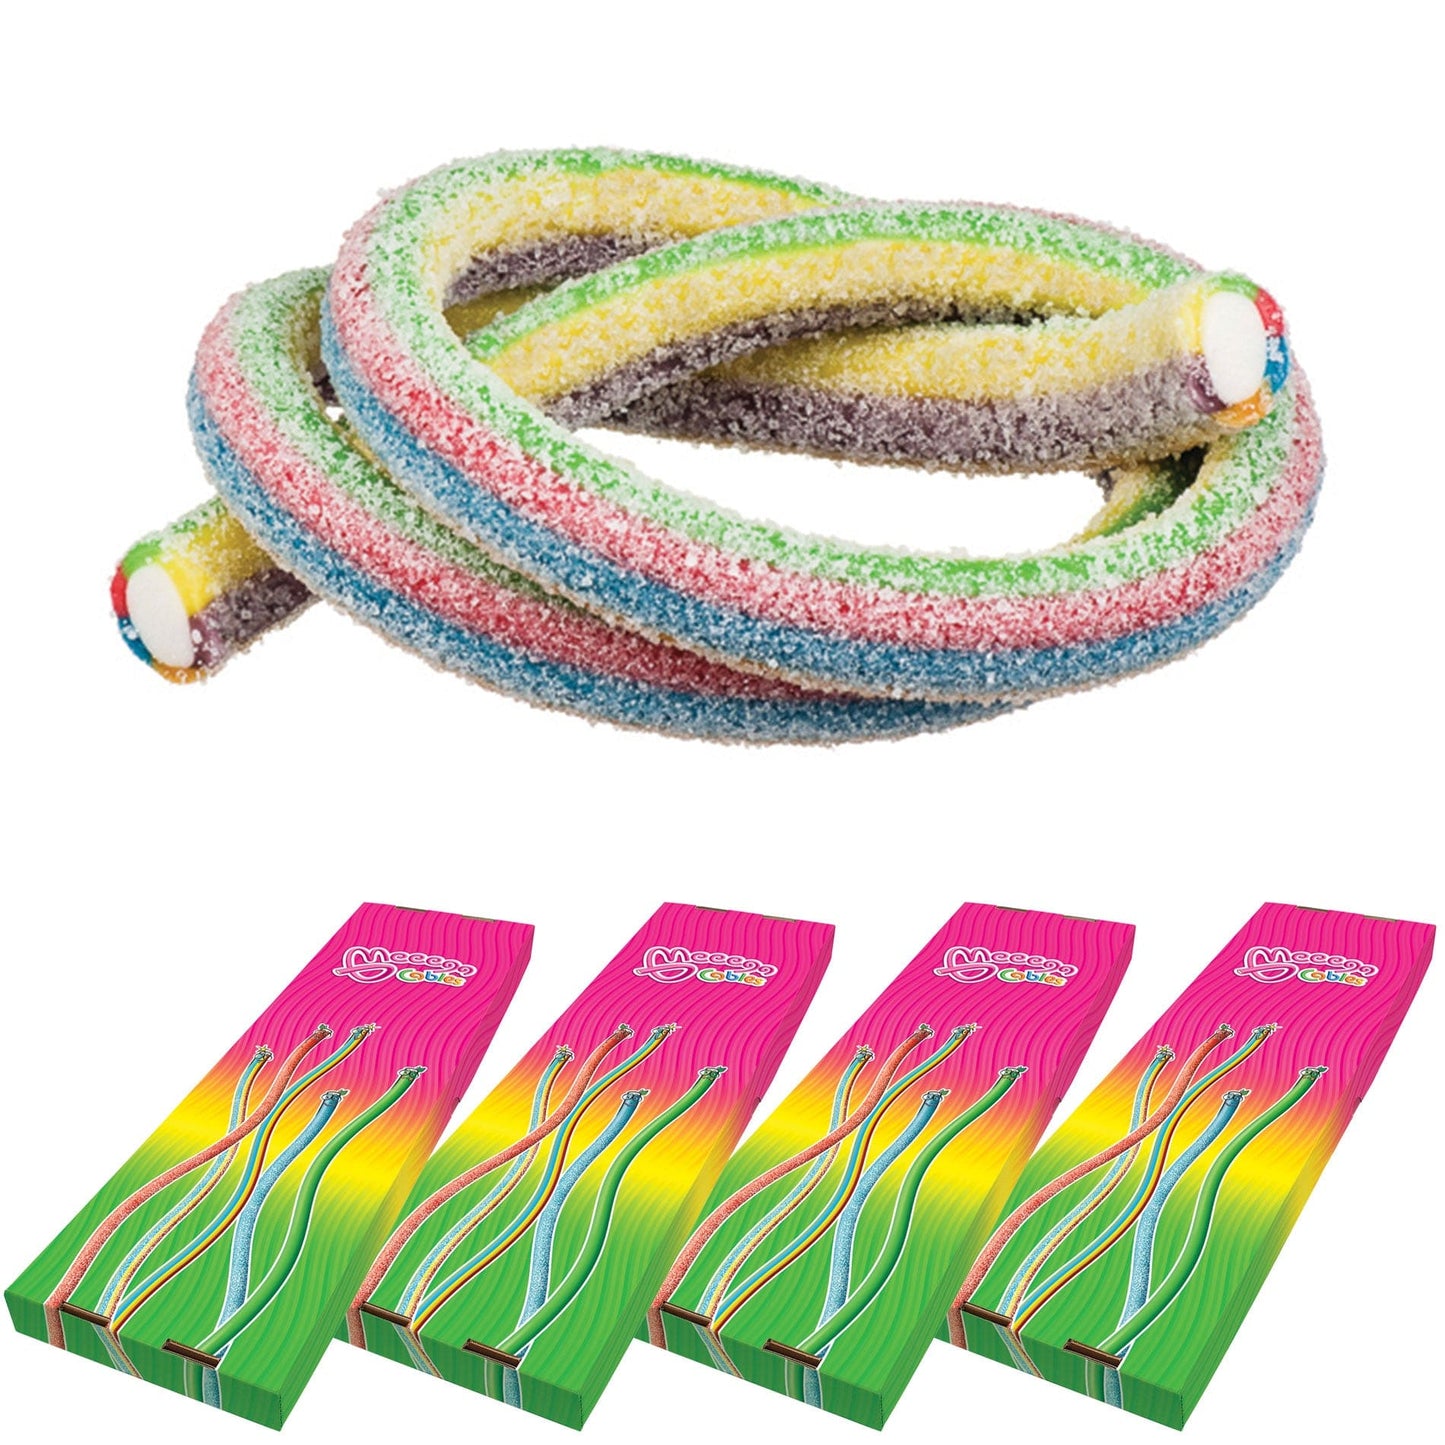 Novelty Concessions Gummy Rope SOUR SUNSHINE FRUIT / 4 Pack (120 pieces) Meeega Cables European Chewy Rope Candy - Box of 30 individually wrapped Meeega Cables, each over 2-feet long cups with lids and straws